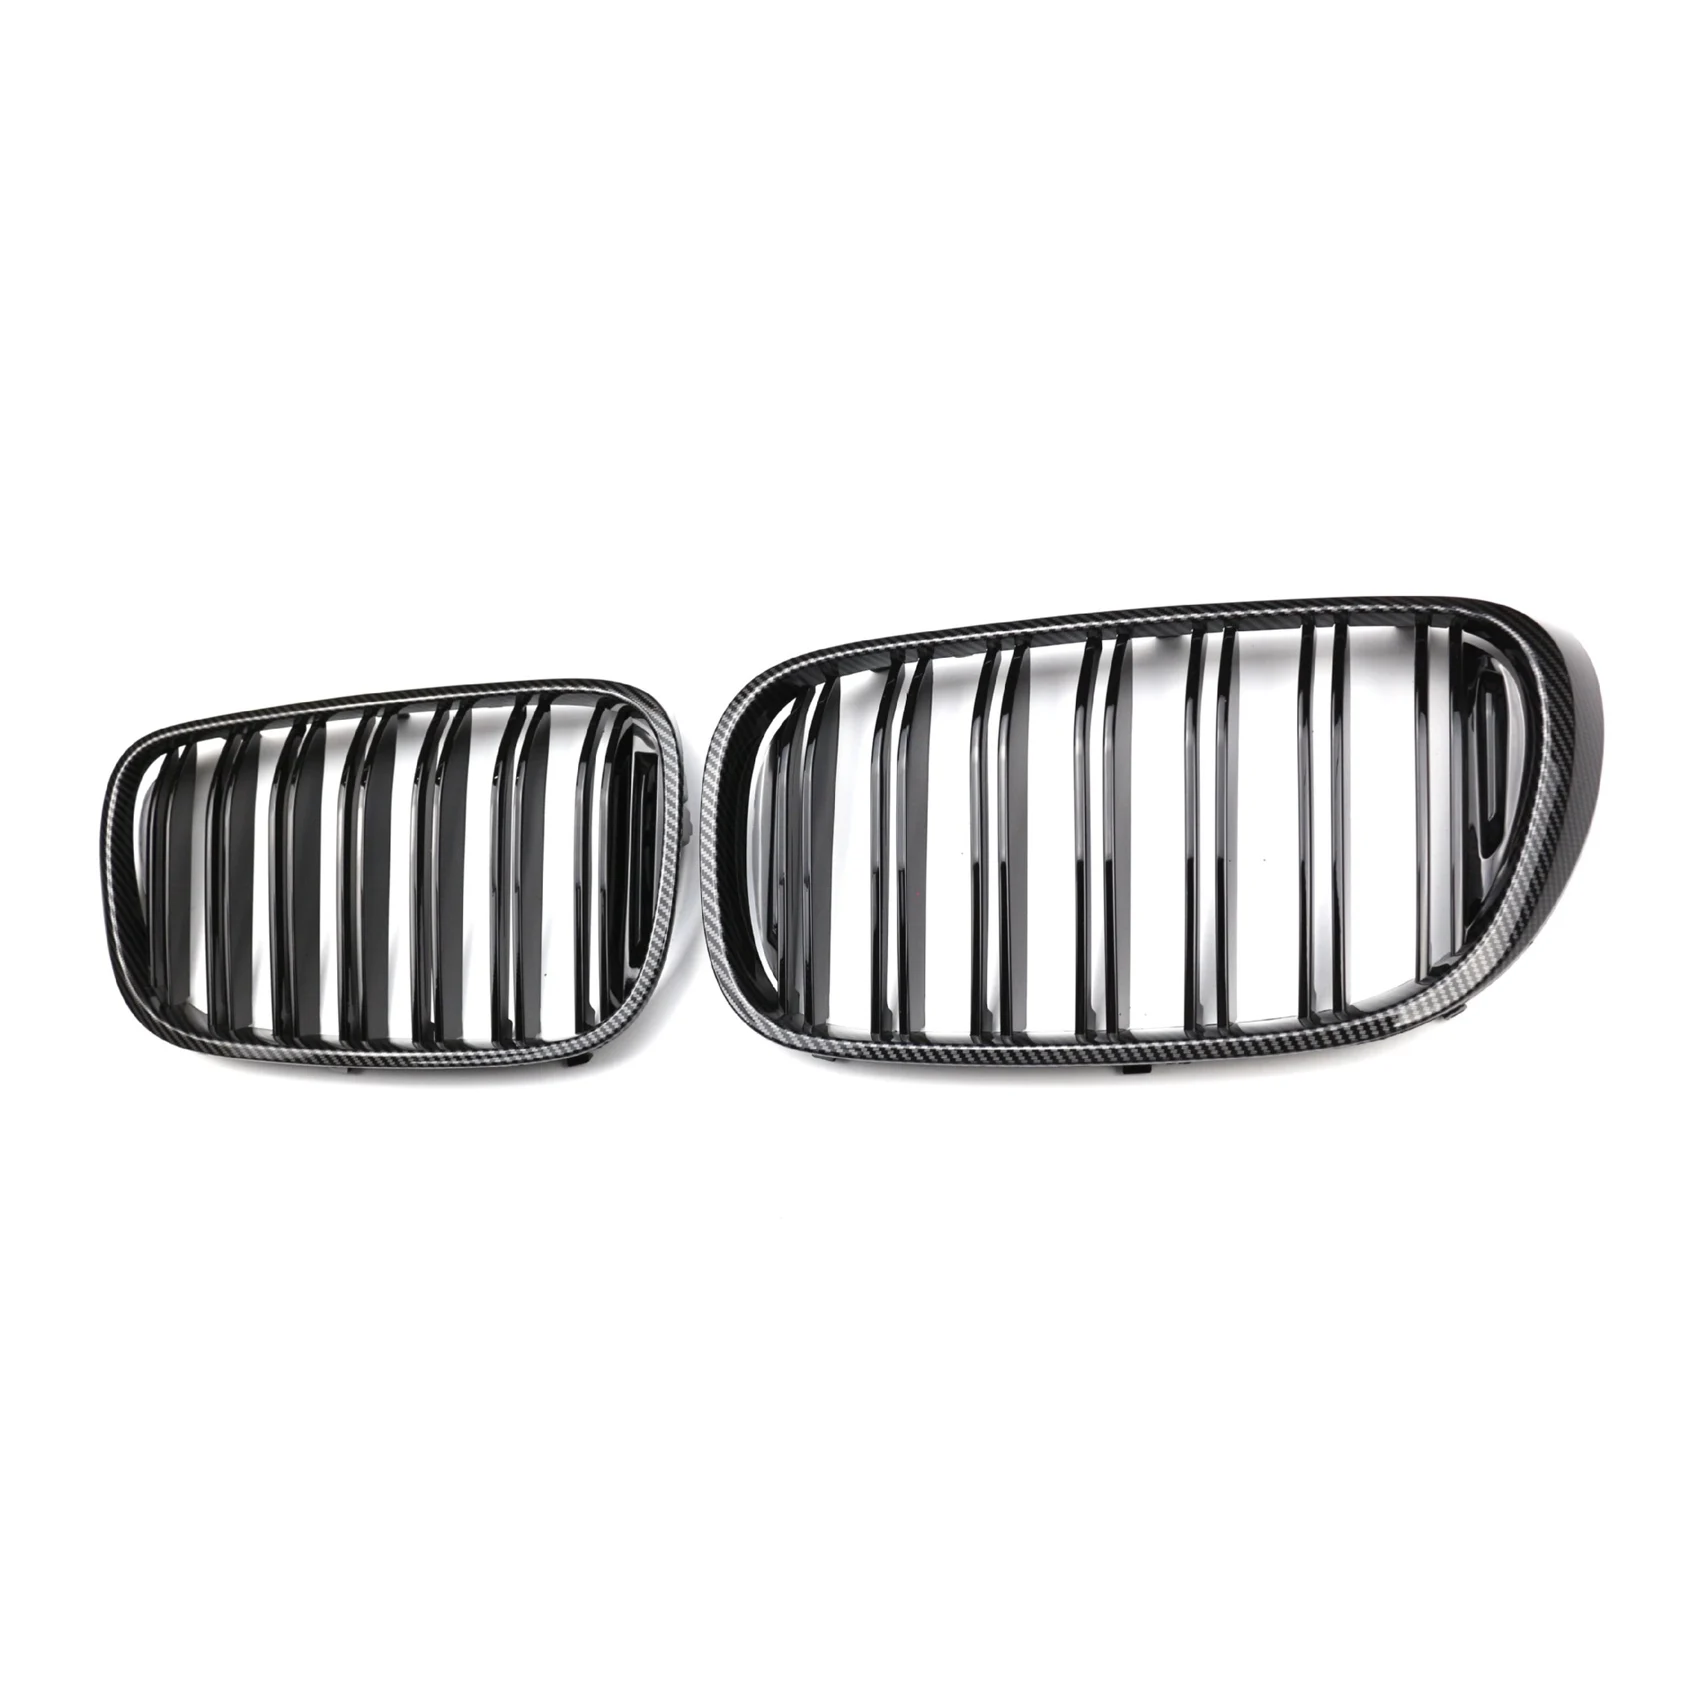 

Pair Car Front Bumper Kidney Hood Grille Grilles for BMW 7-Series G11 G12 G13 2015-2019 ABS Auto Dual Slat Racing Grill